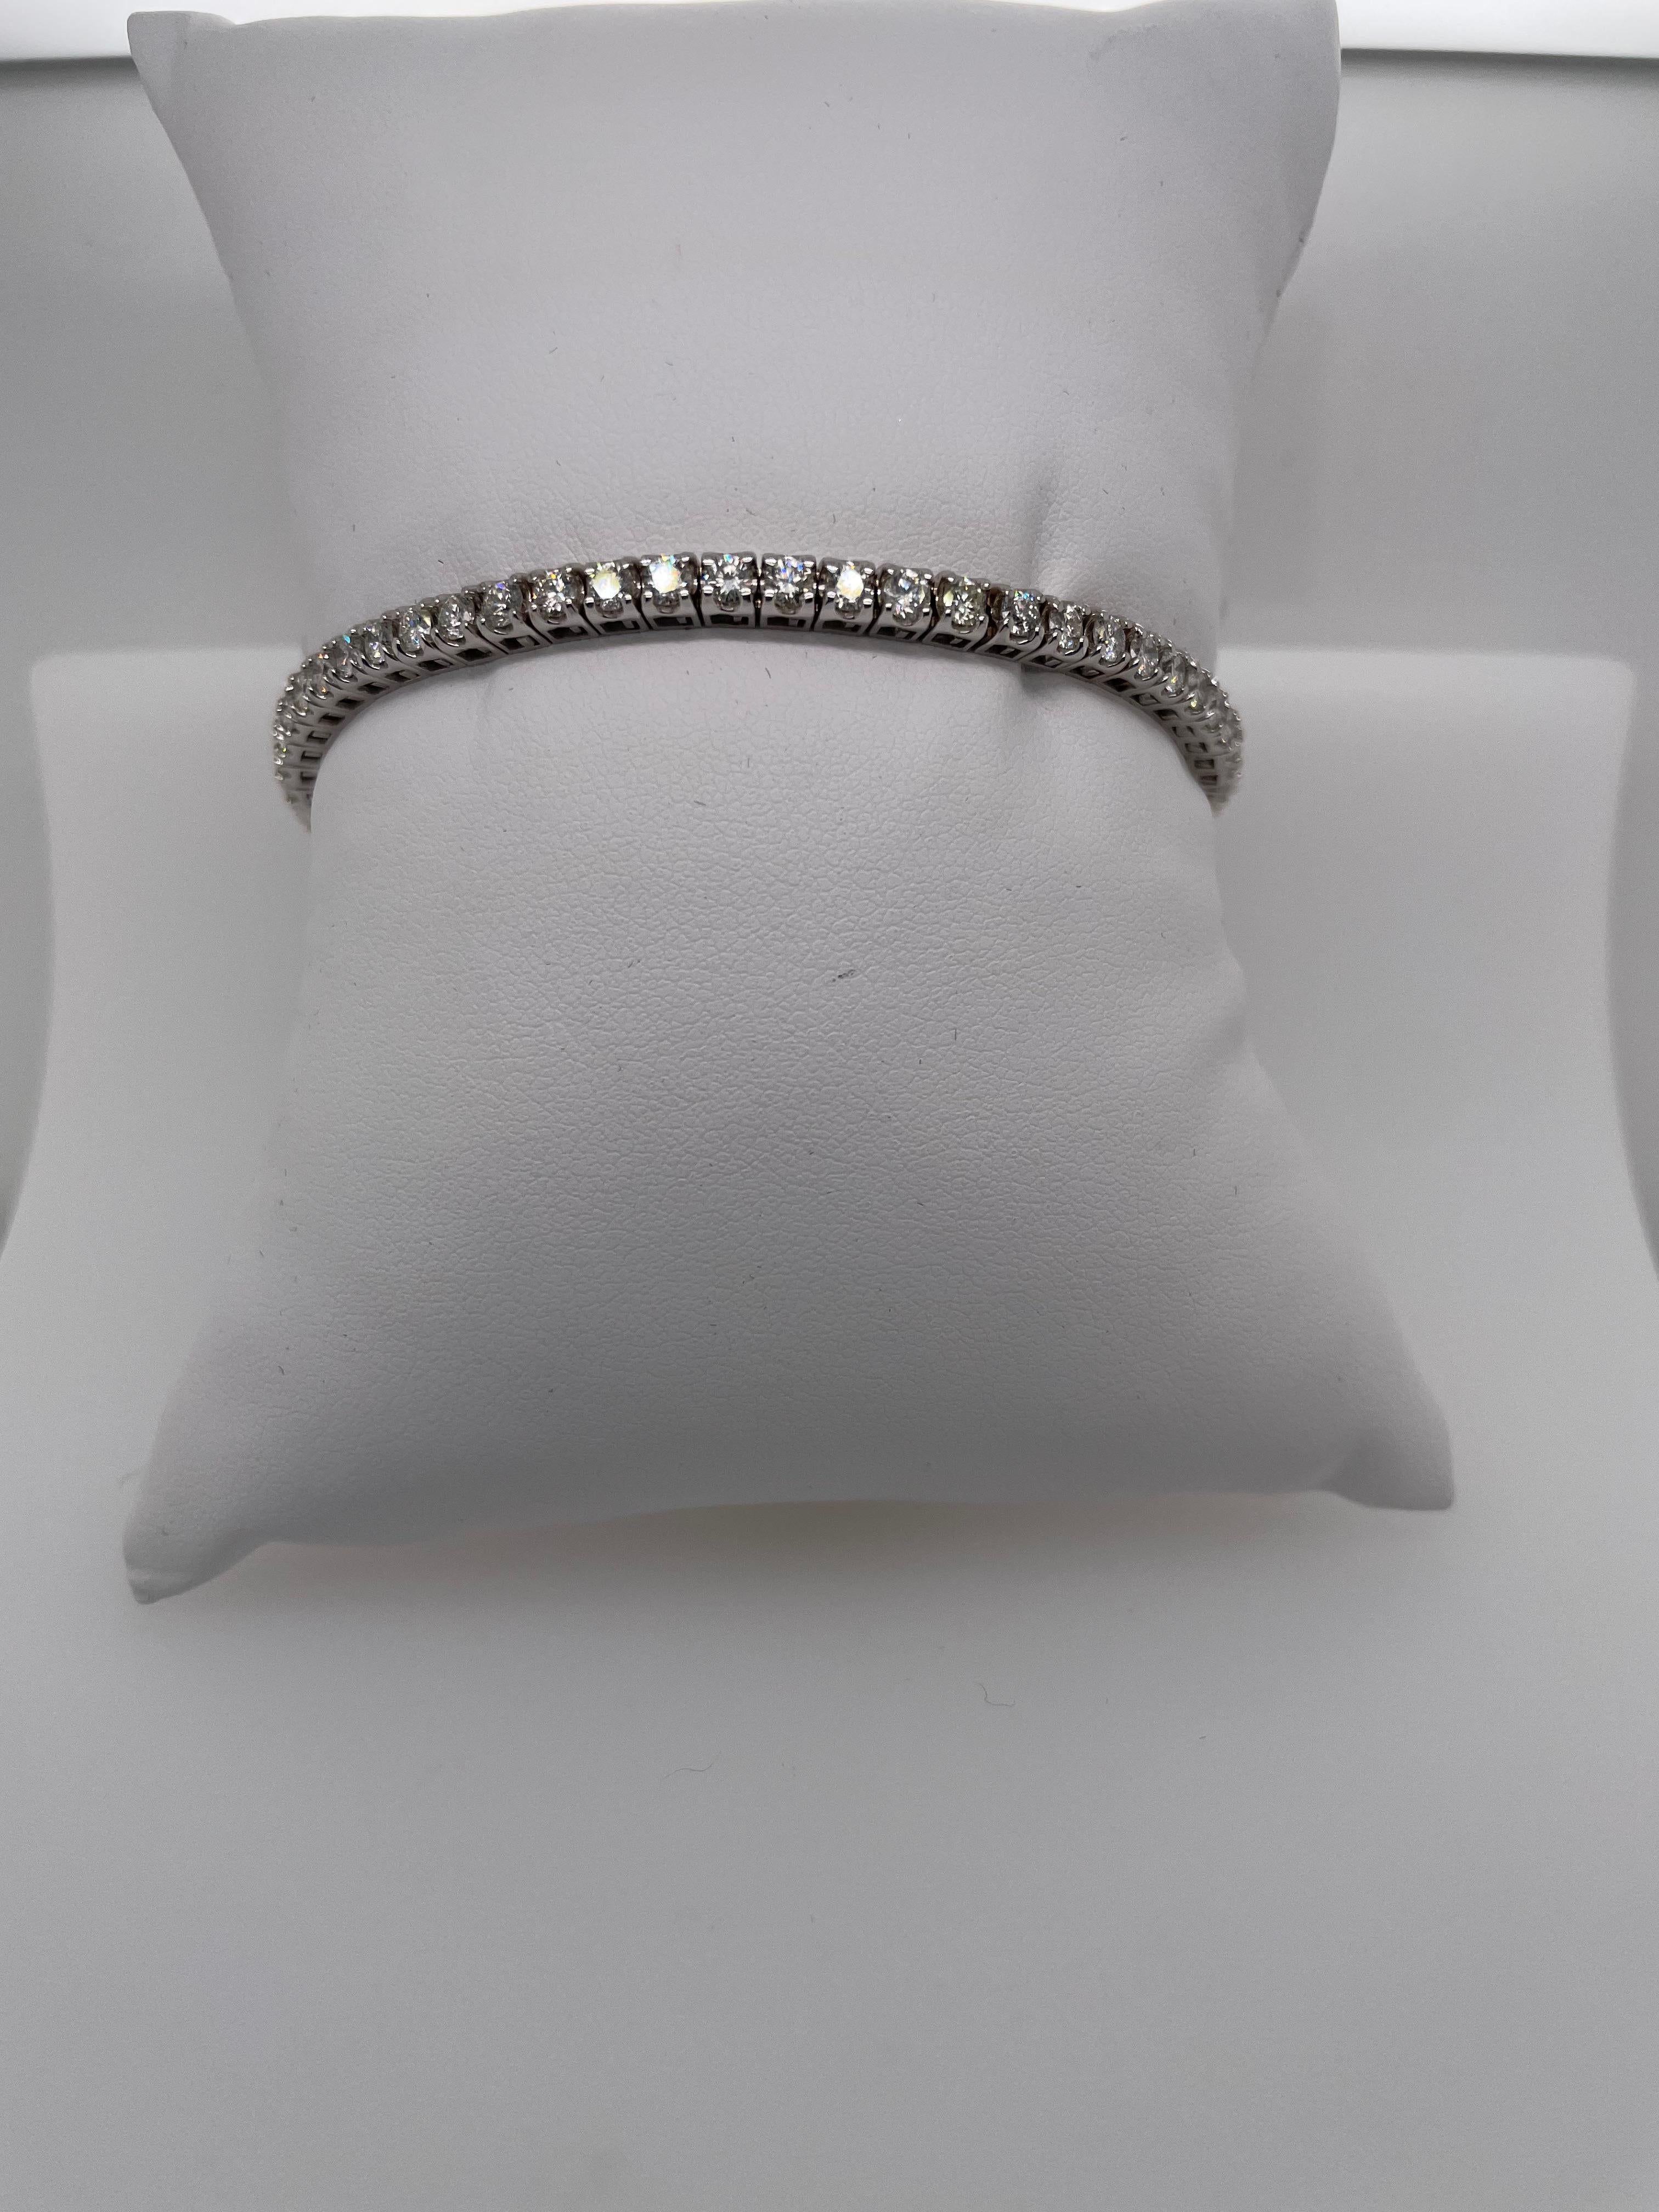 Classic and stunning stretch 5 carat total weight, white diamond tennis bracelet.  14K White Gold.  A classic piece to be worn daily alone or easily stacks beautifully with other bracelets.  A must for any wardrobe! 